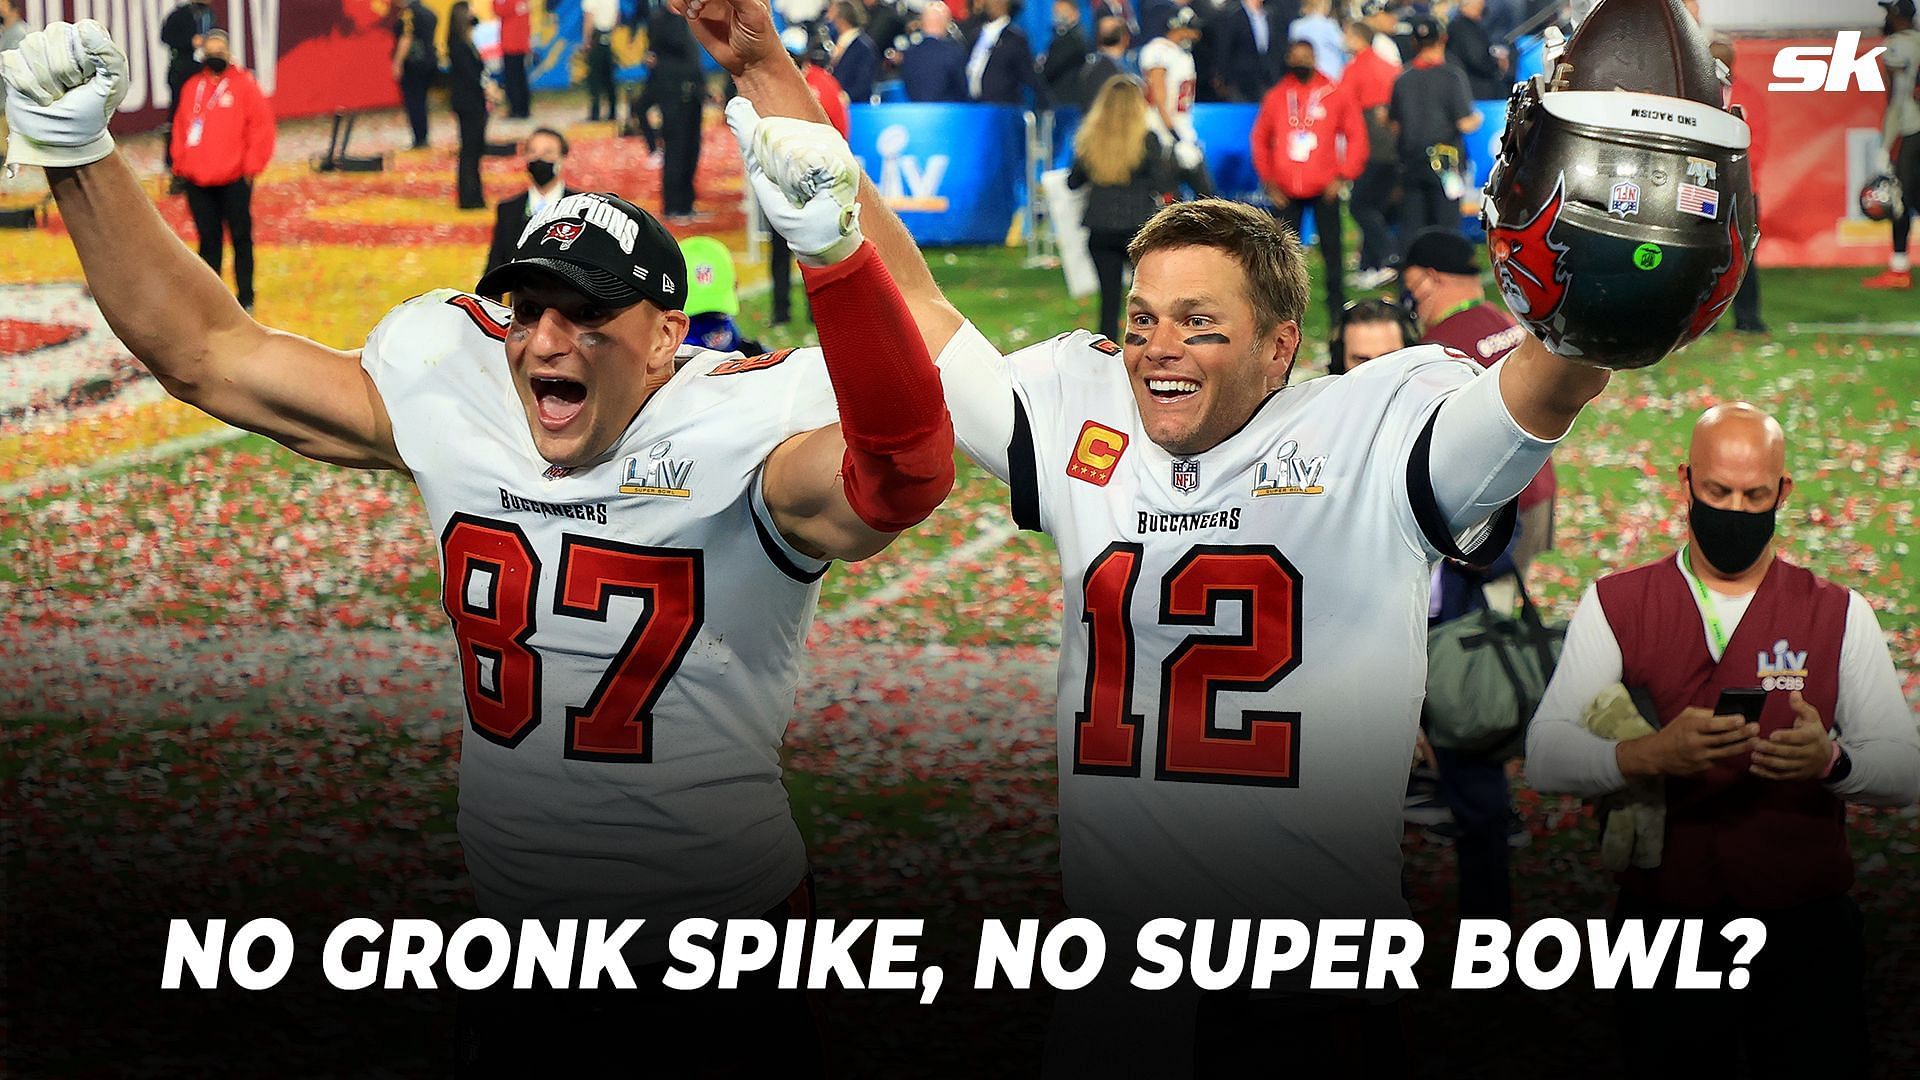 Will Brady win another Super Bowl without Gronk?